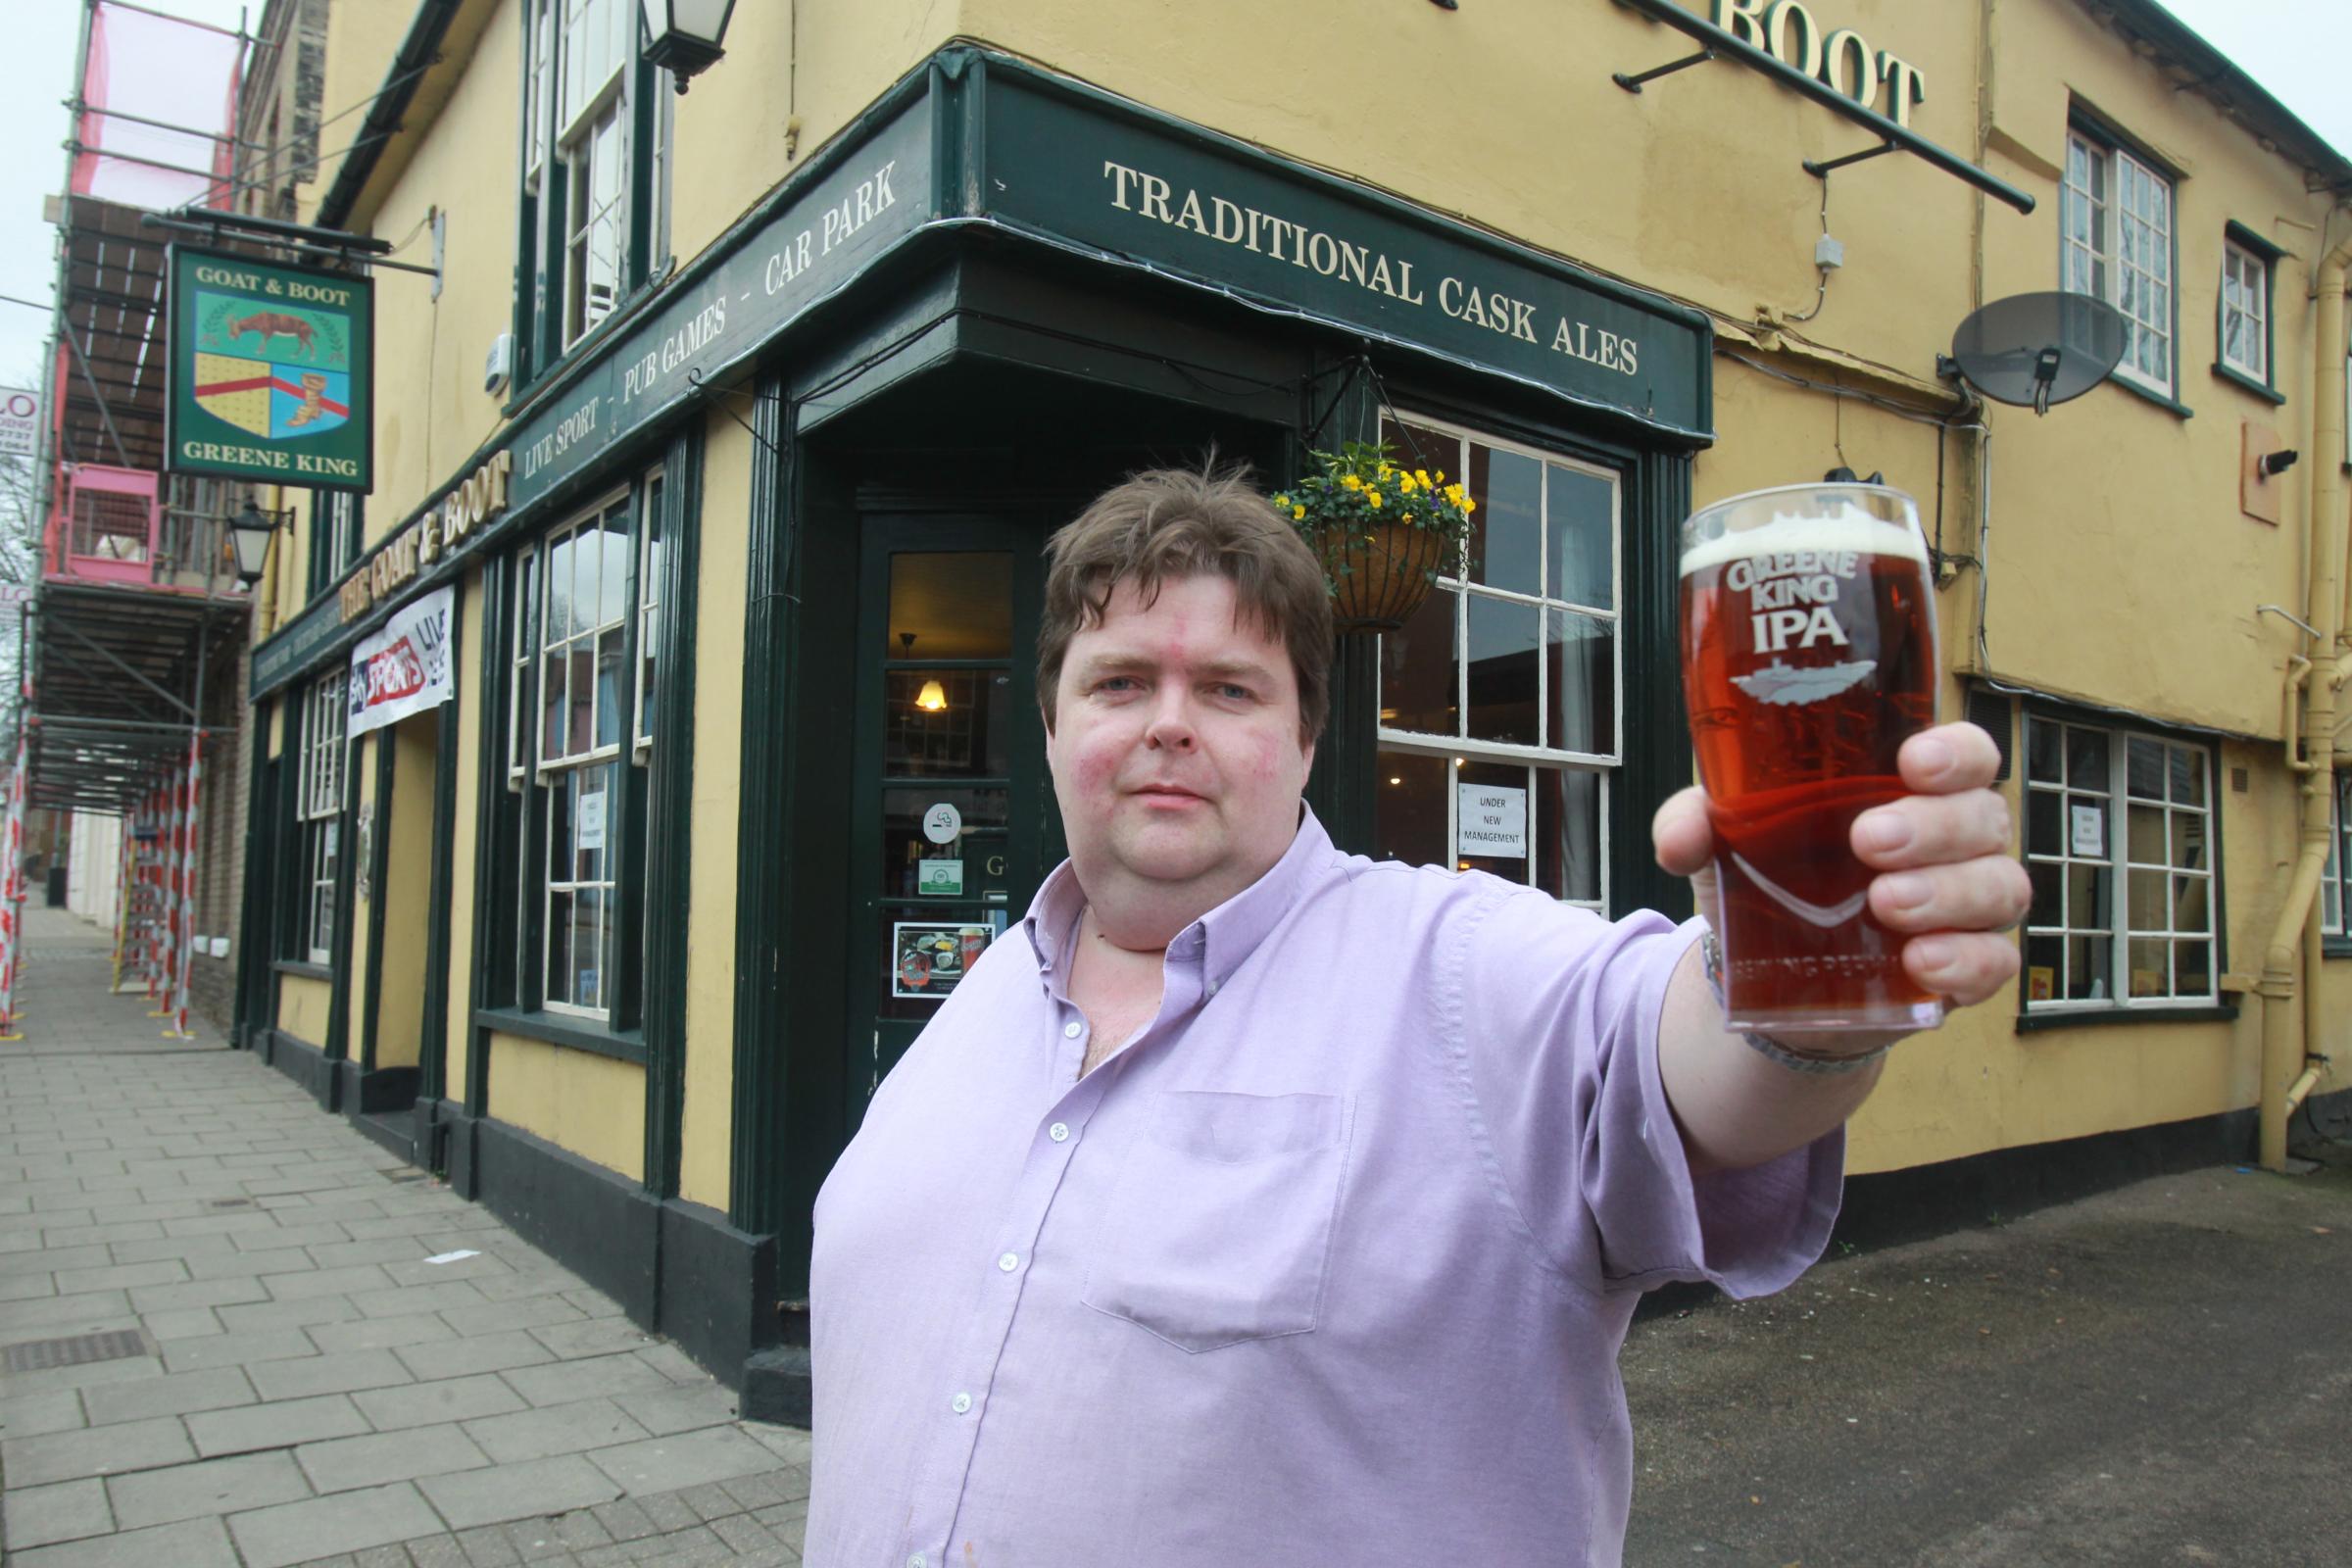 Cheers to my £100k revival plan for pub photo